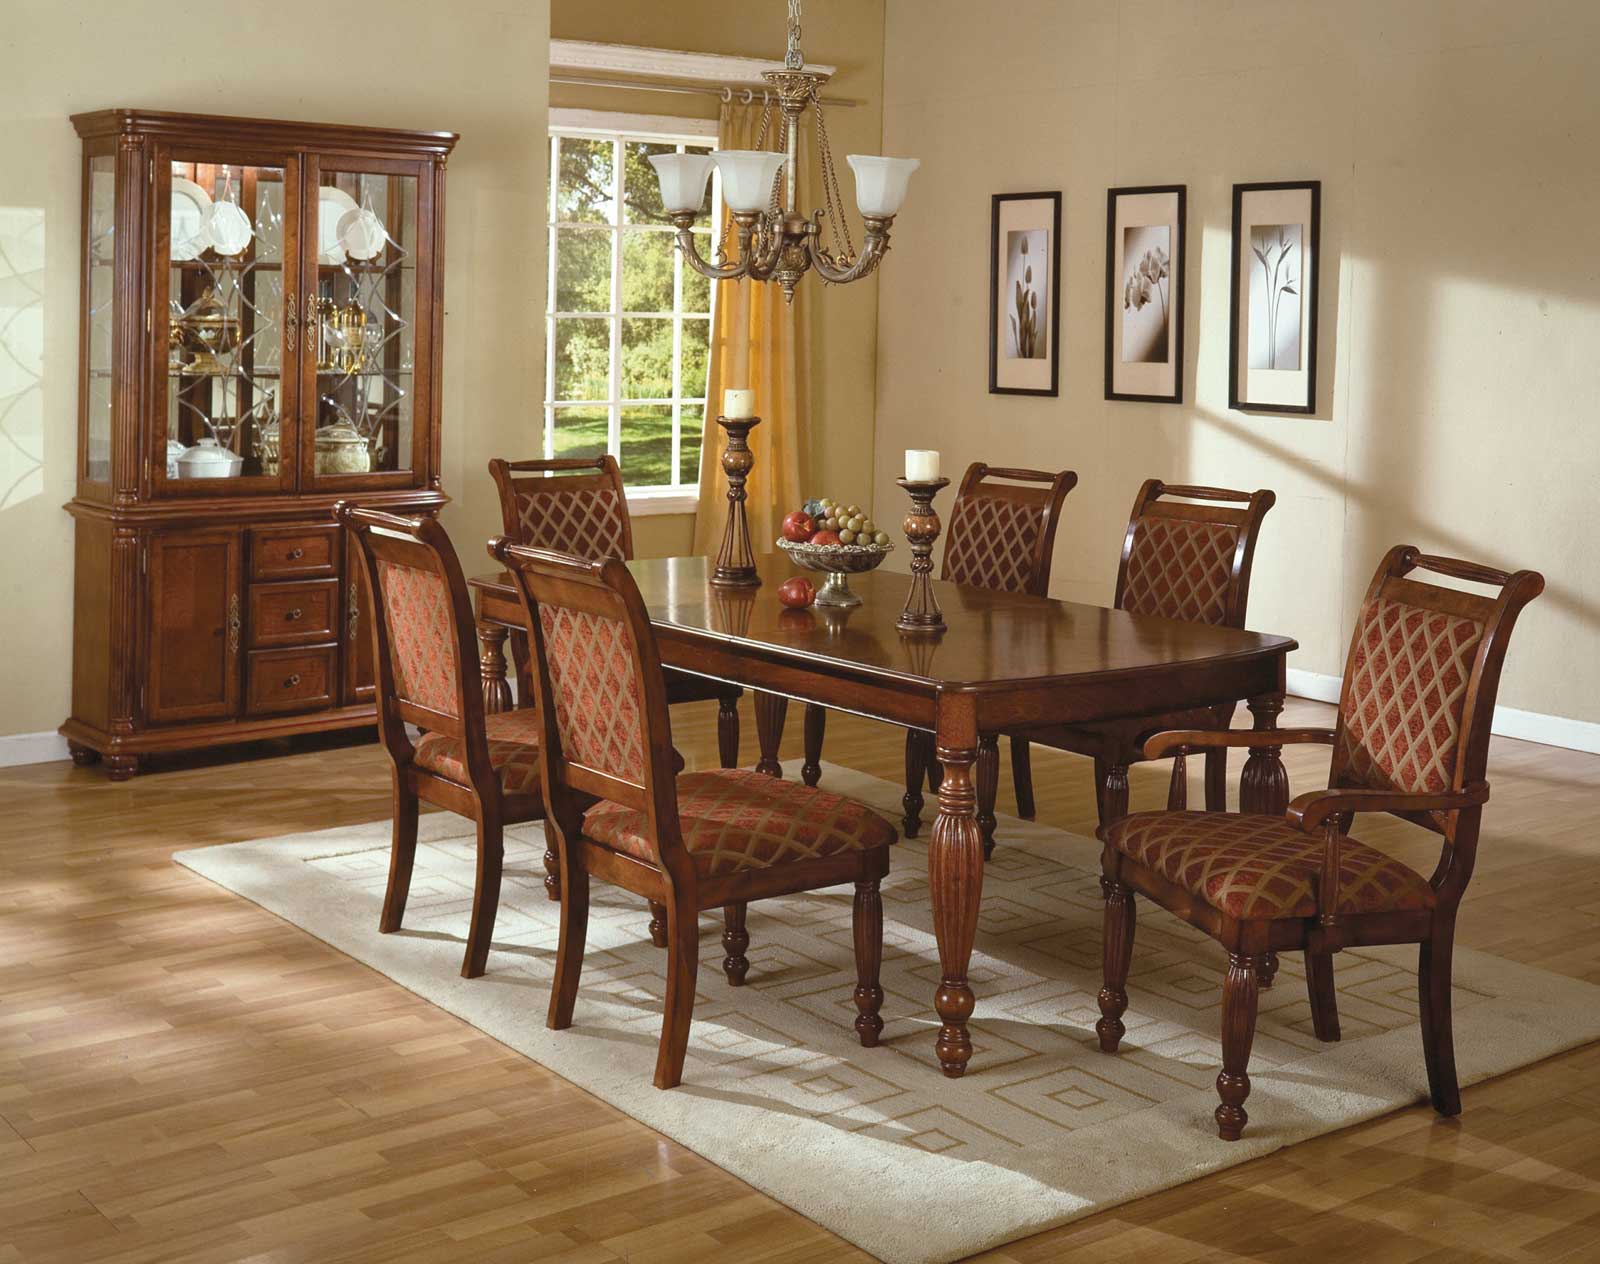 Formal Wooden Furniture Awesome Formal Wooden Dining Room Furniture Sets With Contemporary Pendant Lamp Dining Room Design And Minimalist Closet Dining Room Models Also Laminate Flooring Dining Room Wooden Stylish Of Dining Room Chairs